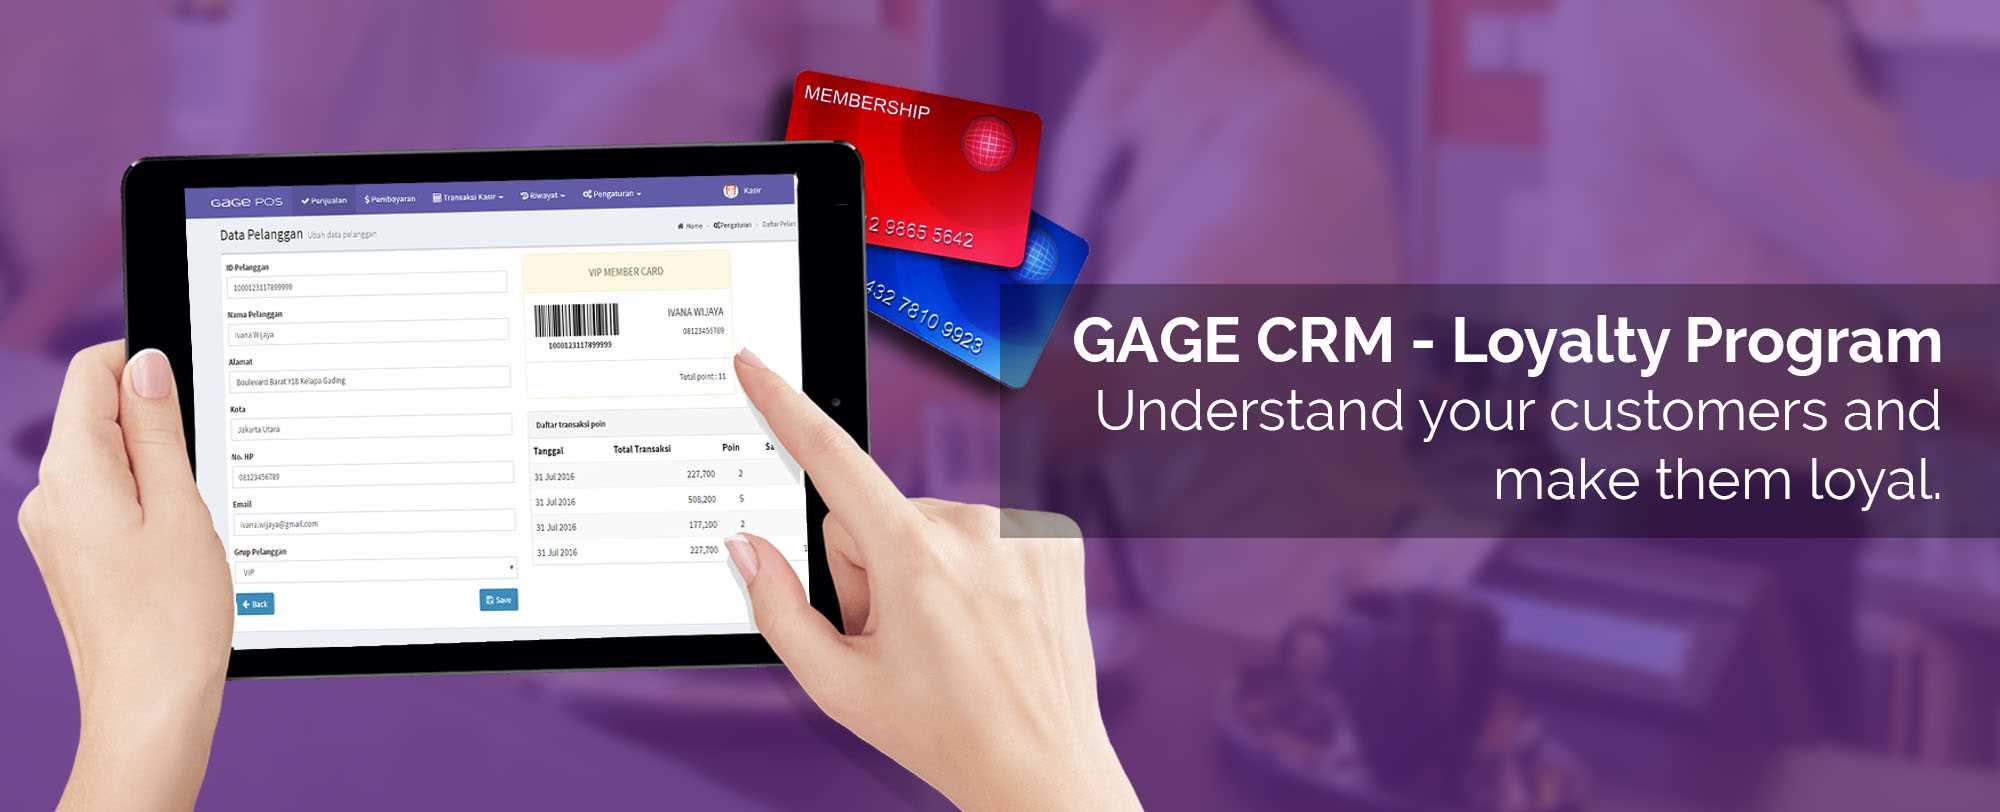 GAGE POS CRM - Loyalty Program - Understand your customers and make them loyal